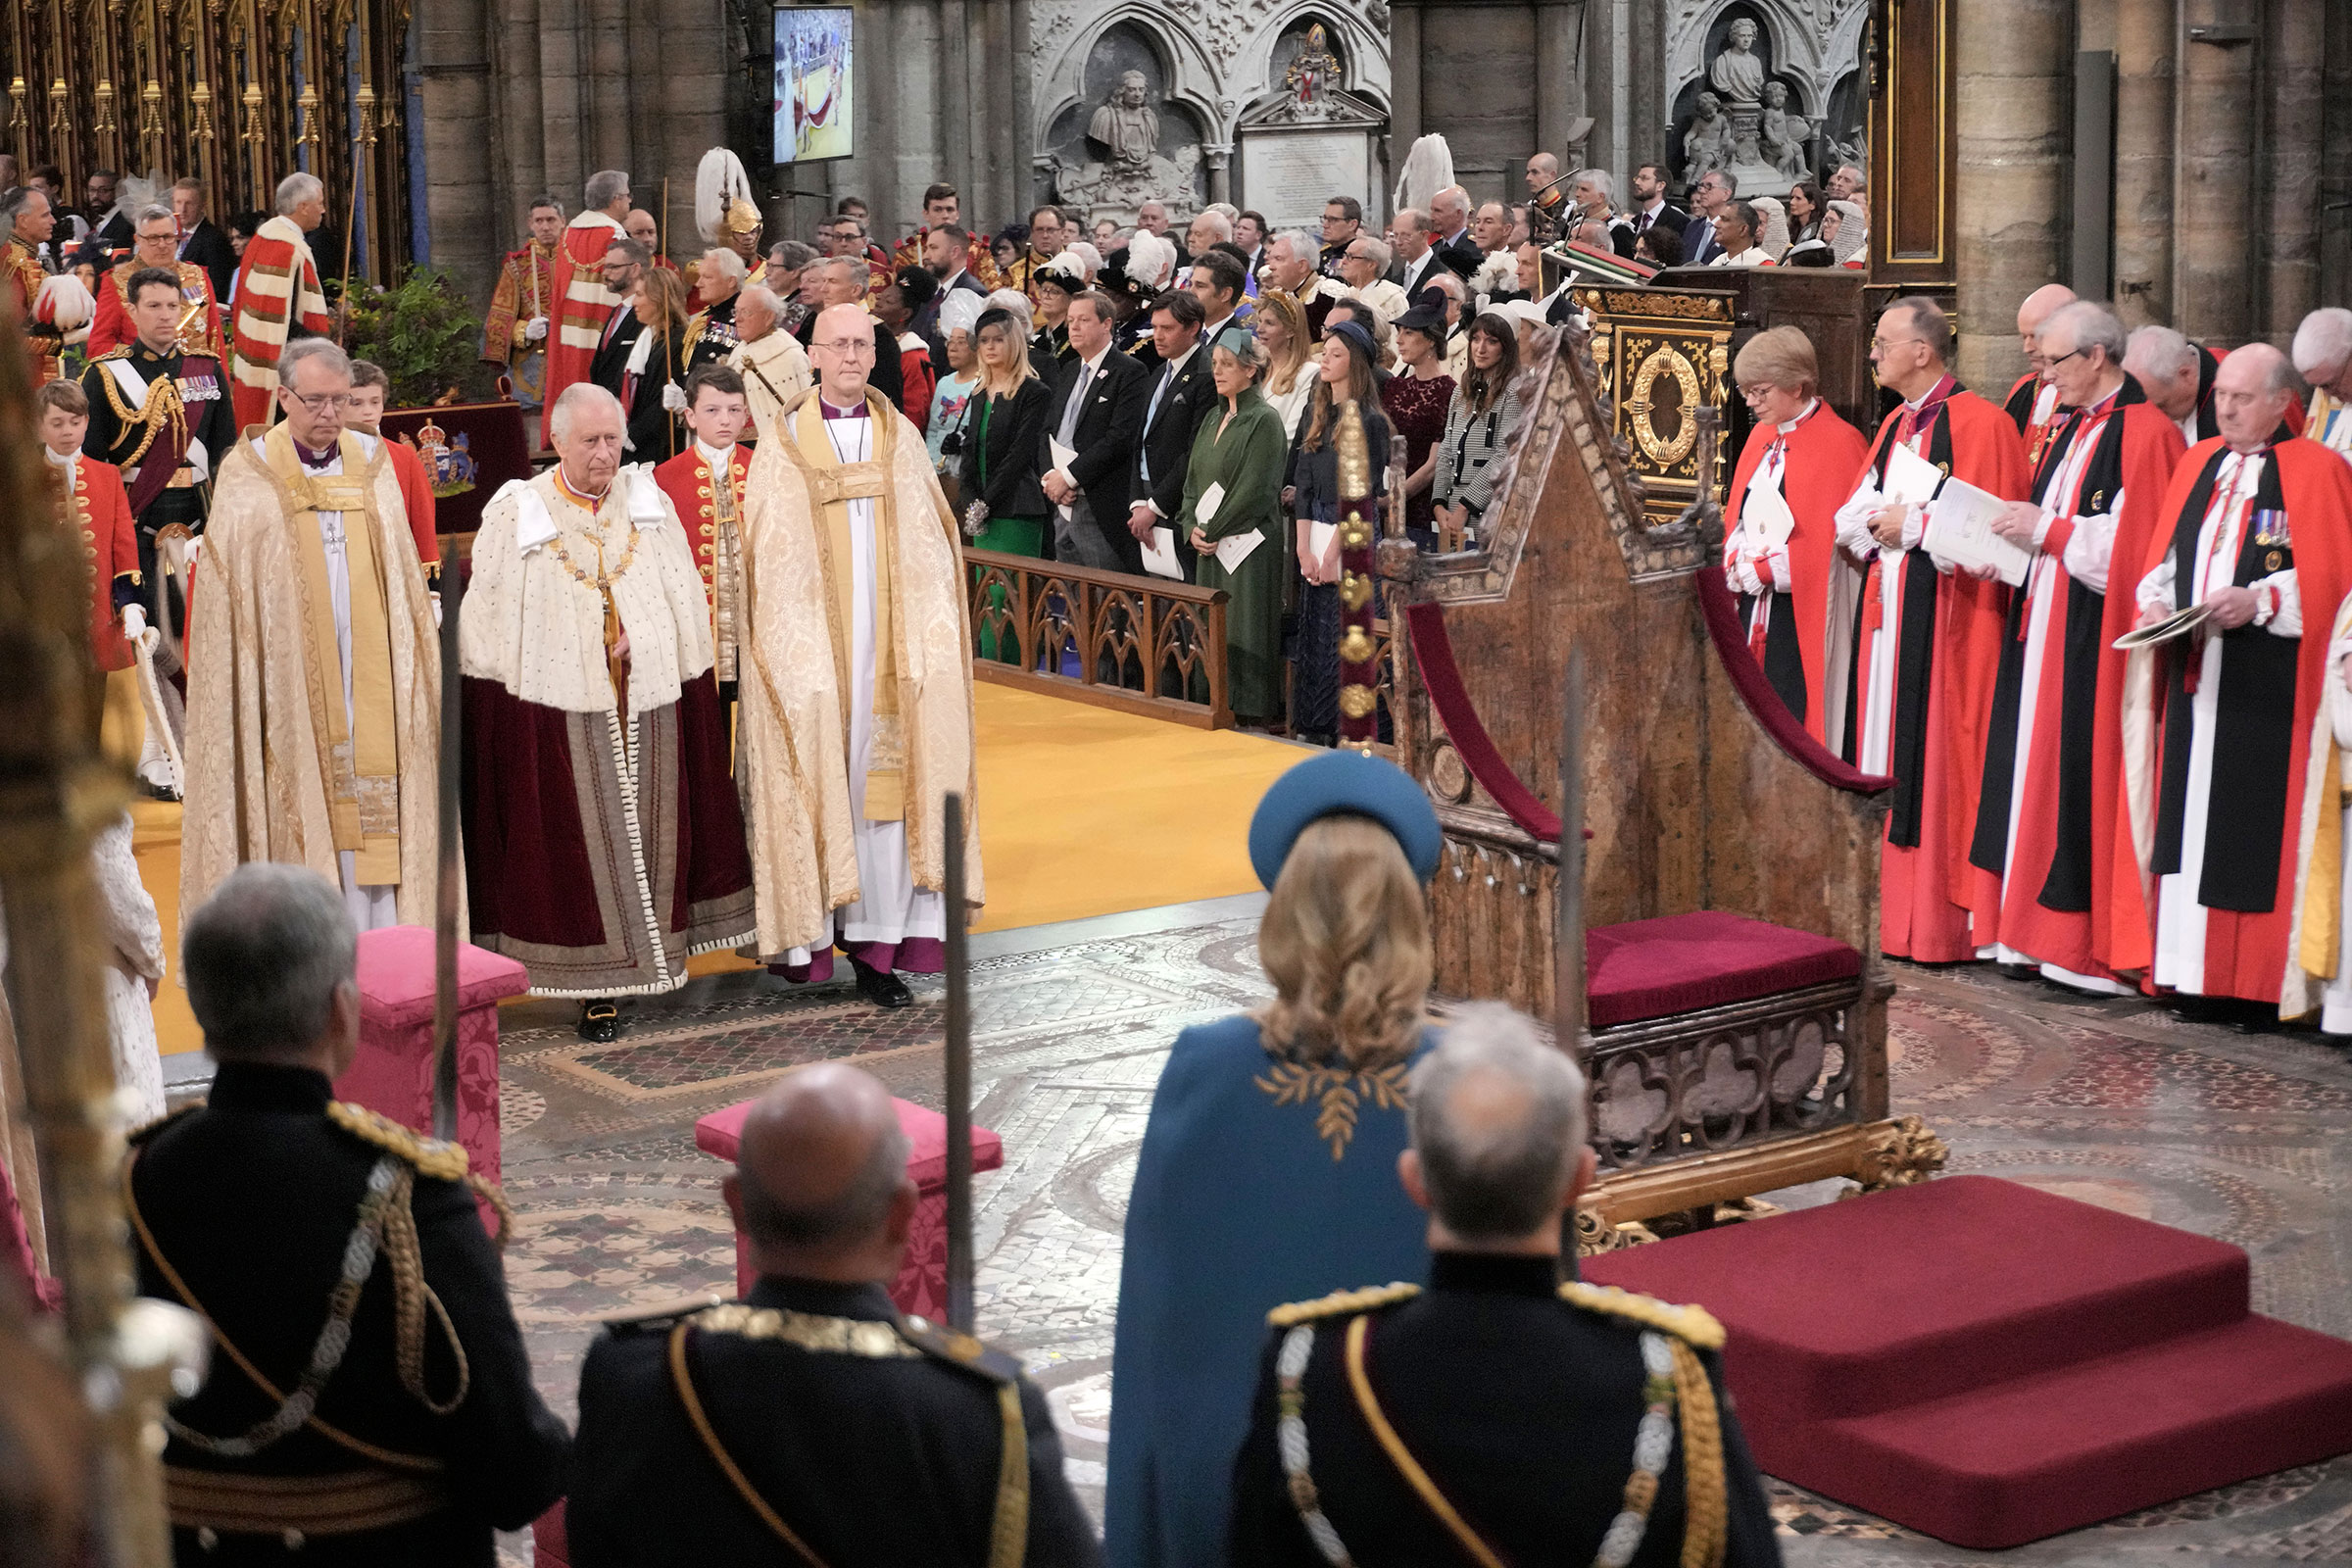 King Charles III arrives for his coronation ceremony in Westminster Abbey.